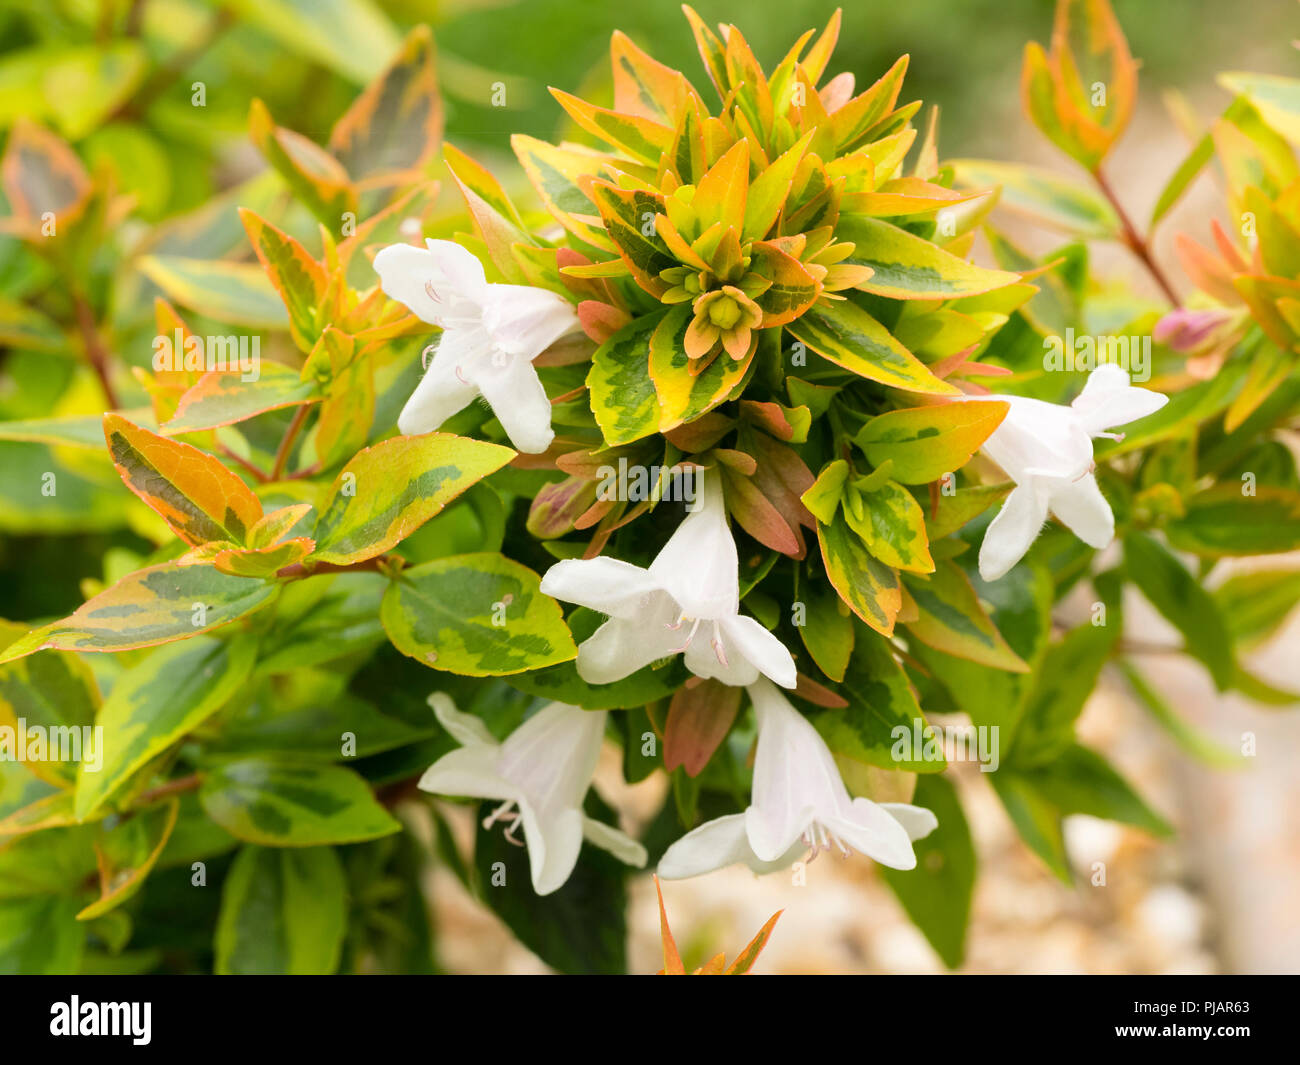 Yellow, gold and green foliage of the hardy evergreen shrub, Abelia x grandiflora 'Kaleidoscope', contrasts with the white flowers Stock Photo